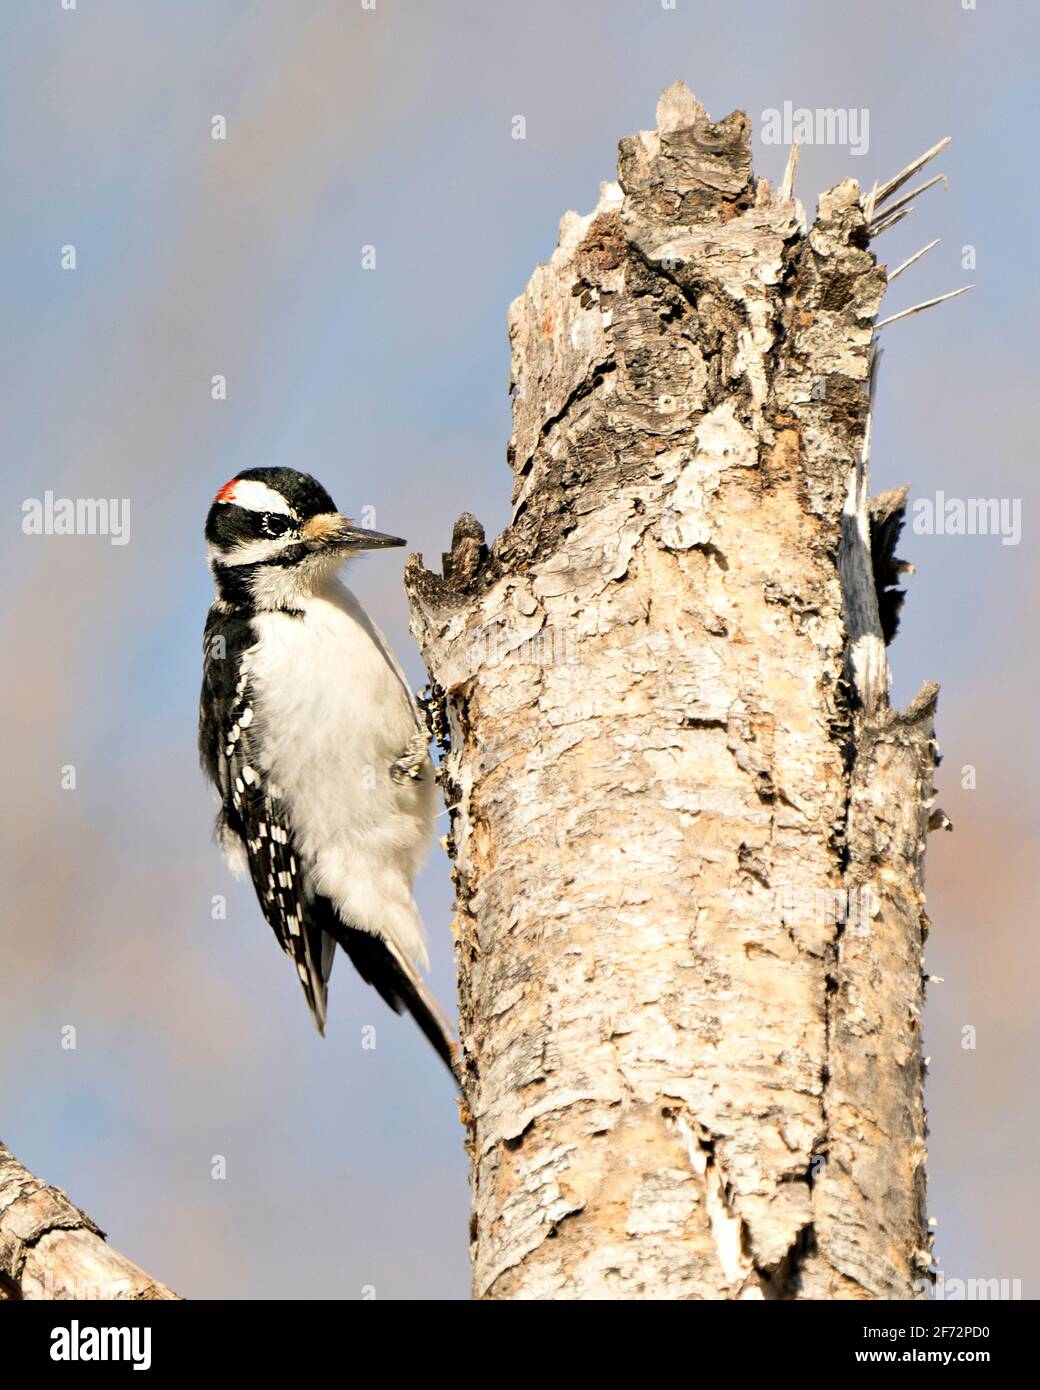 Woodpecker close-up profile view on top of a tree and displaying feather plumage in its environment and habitat in the forest with a blur background. Stock Photo